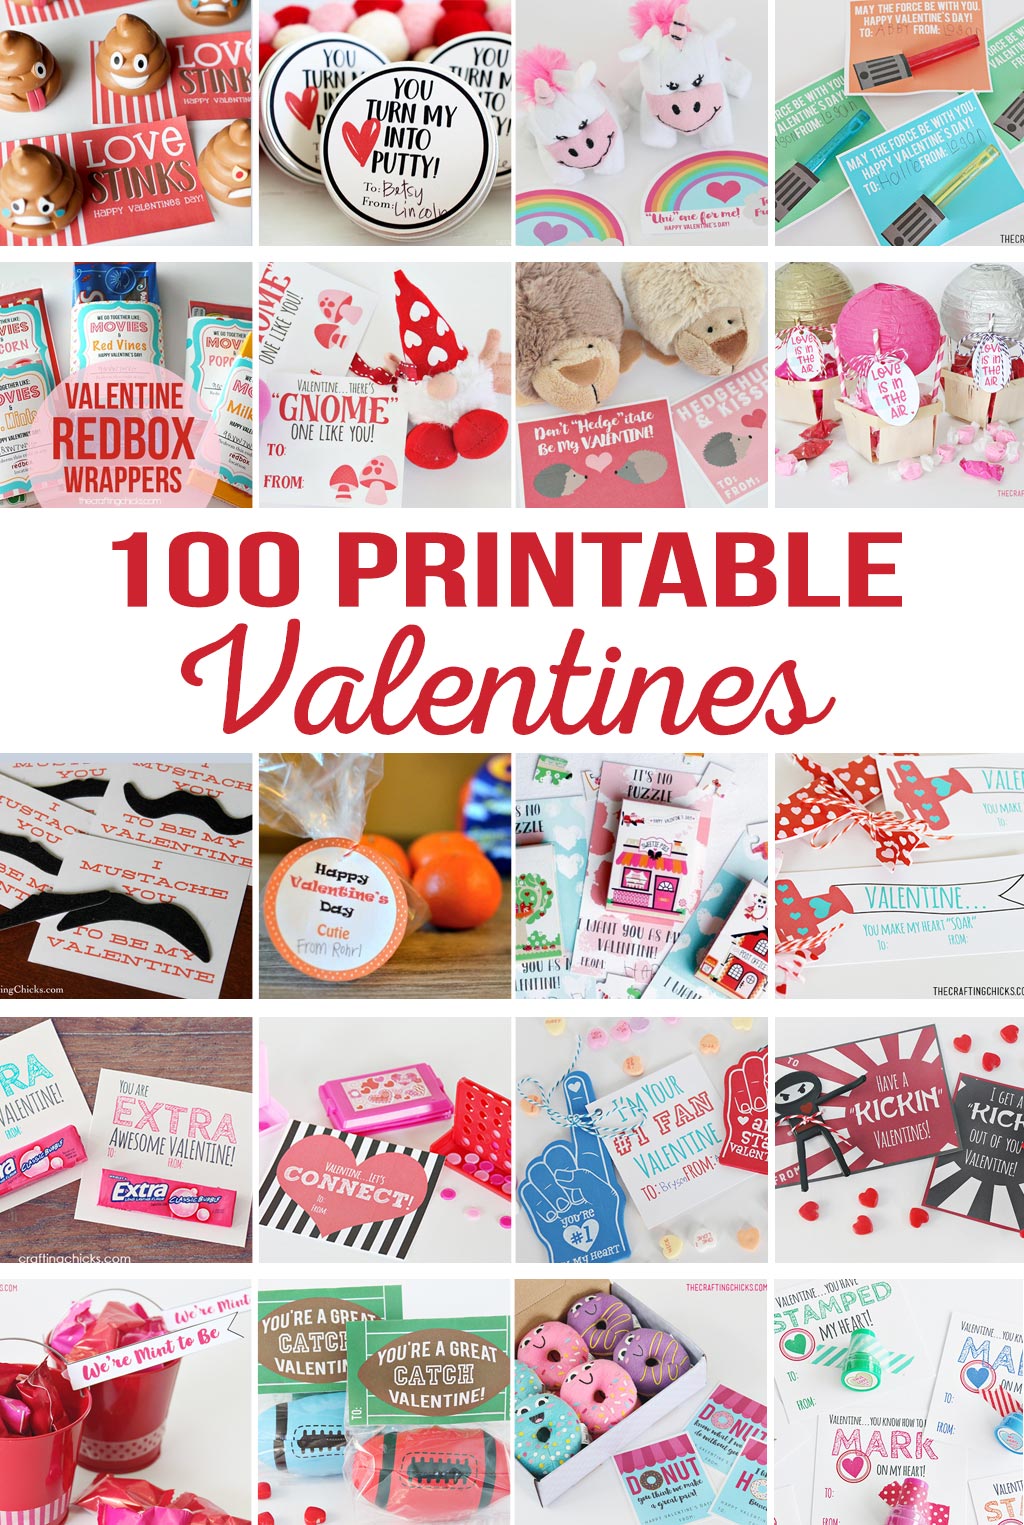 100 Printable Valentines from The Crafting Chicks